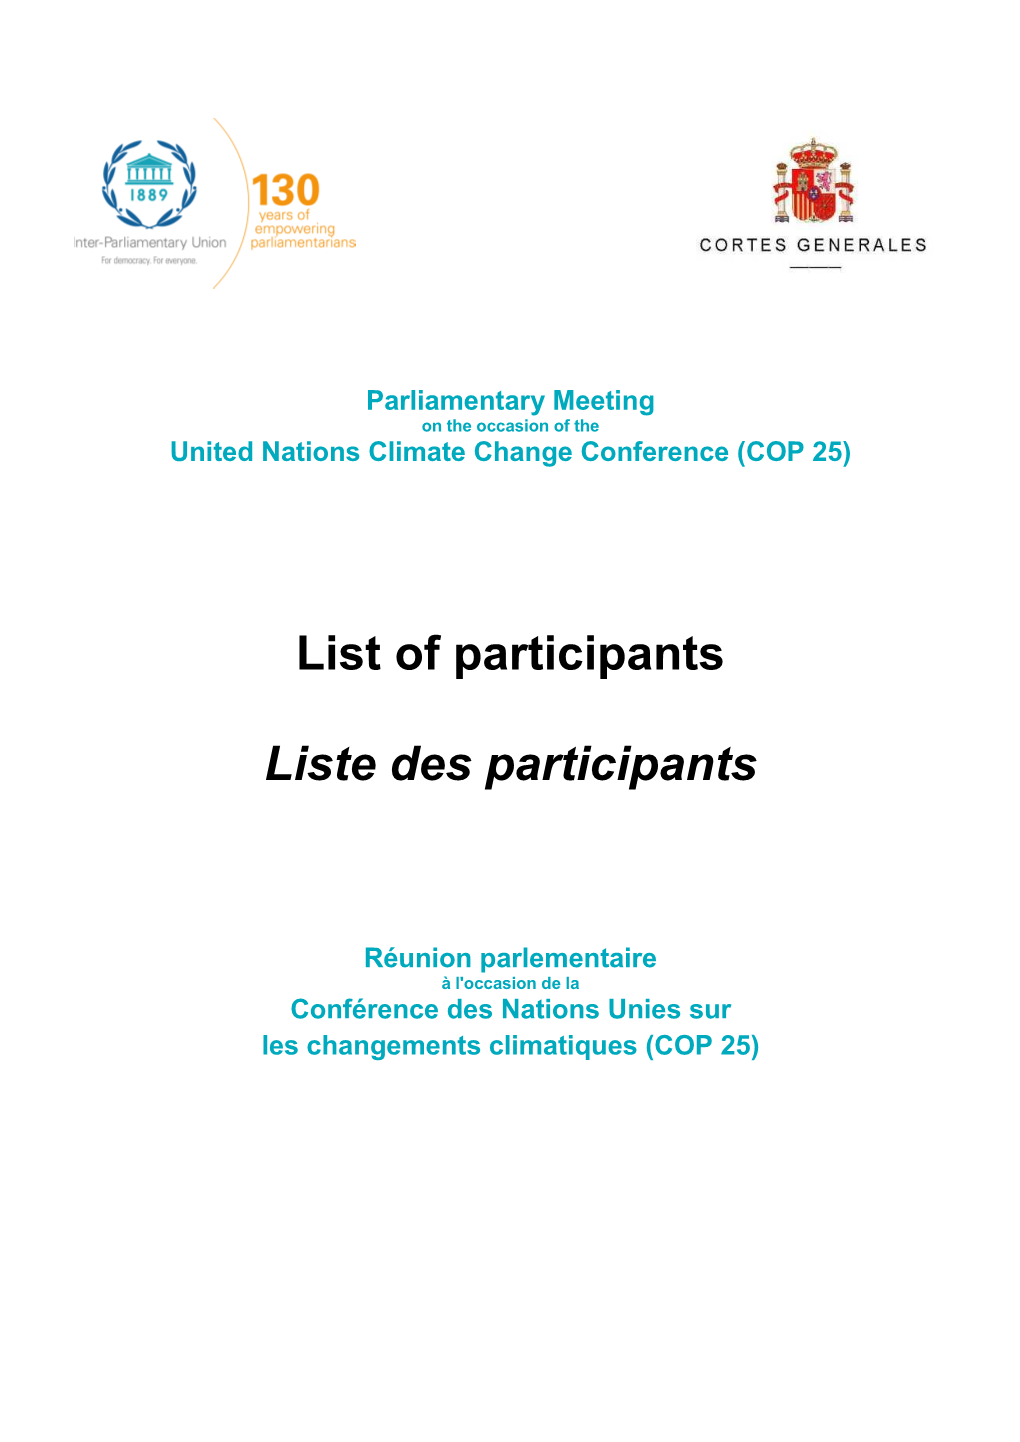 United Nations Climate Change Conference (COP 25)